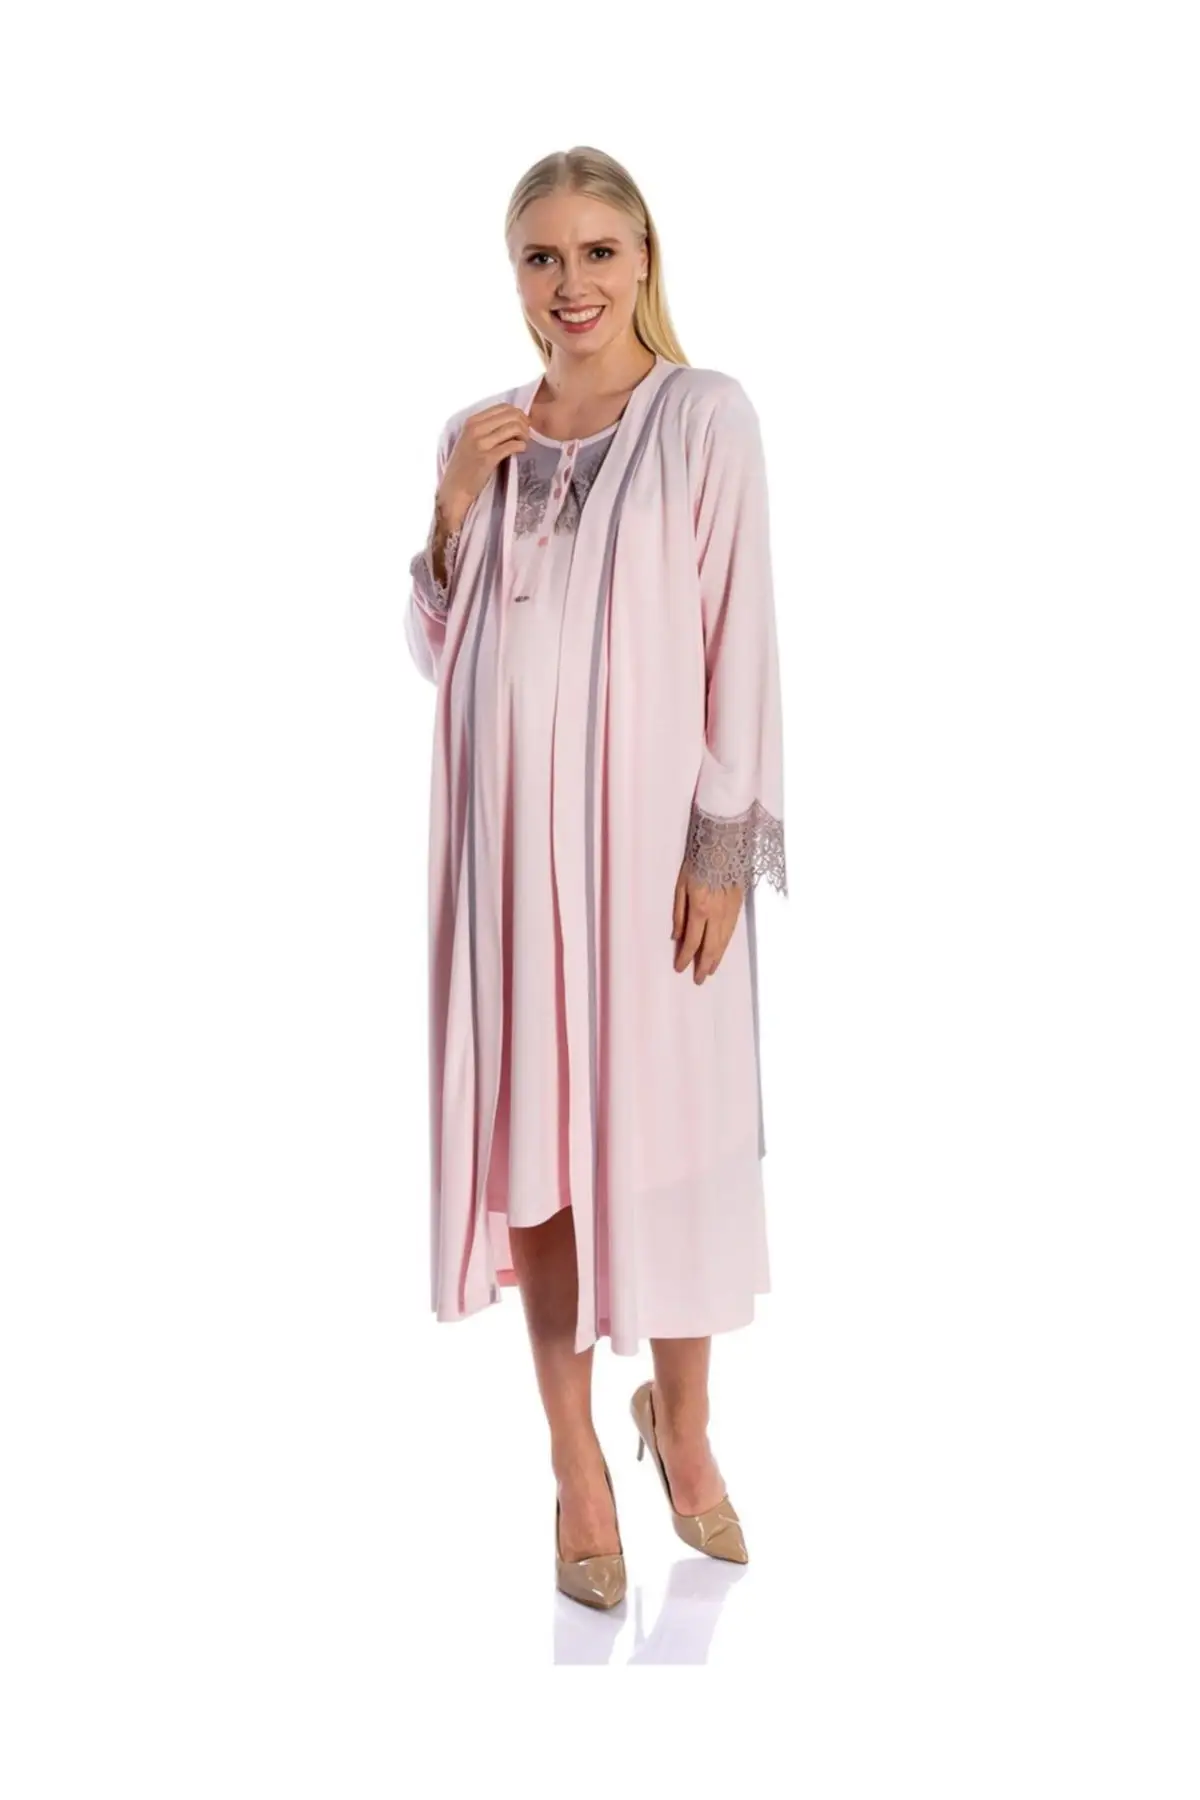 Julia Puerperal Nightgown Dressing Gown Kit Powder Pregnant